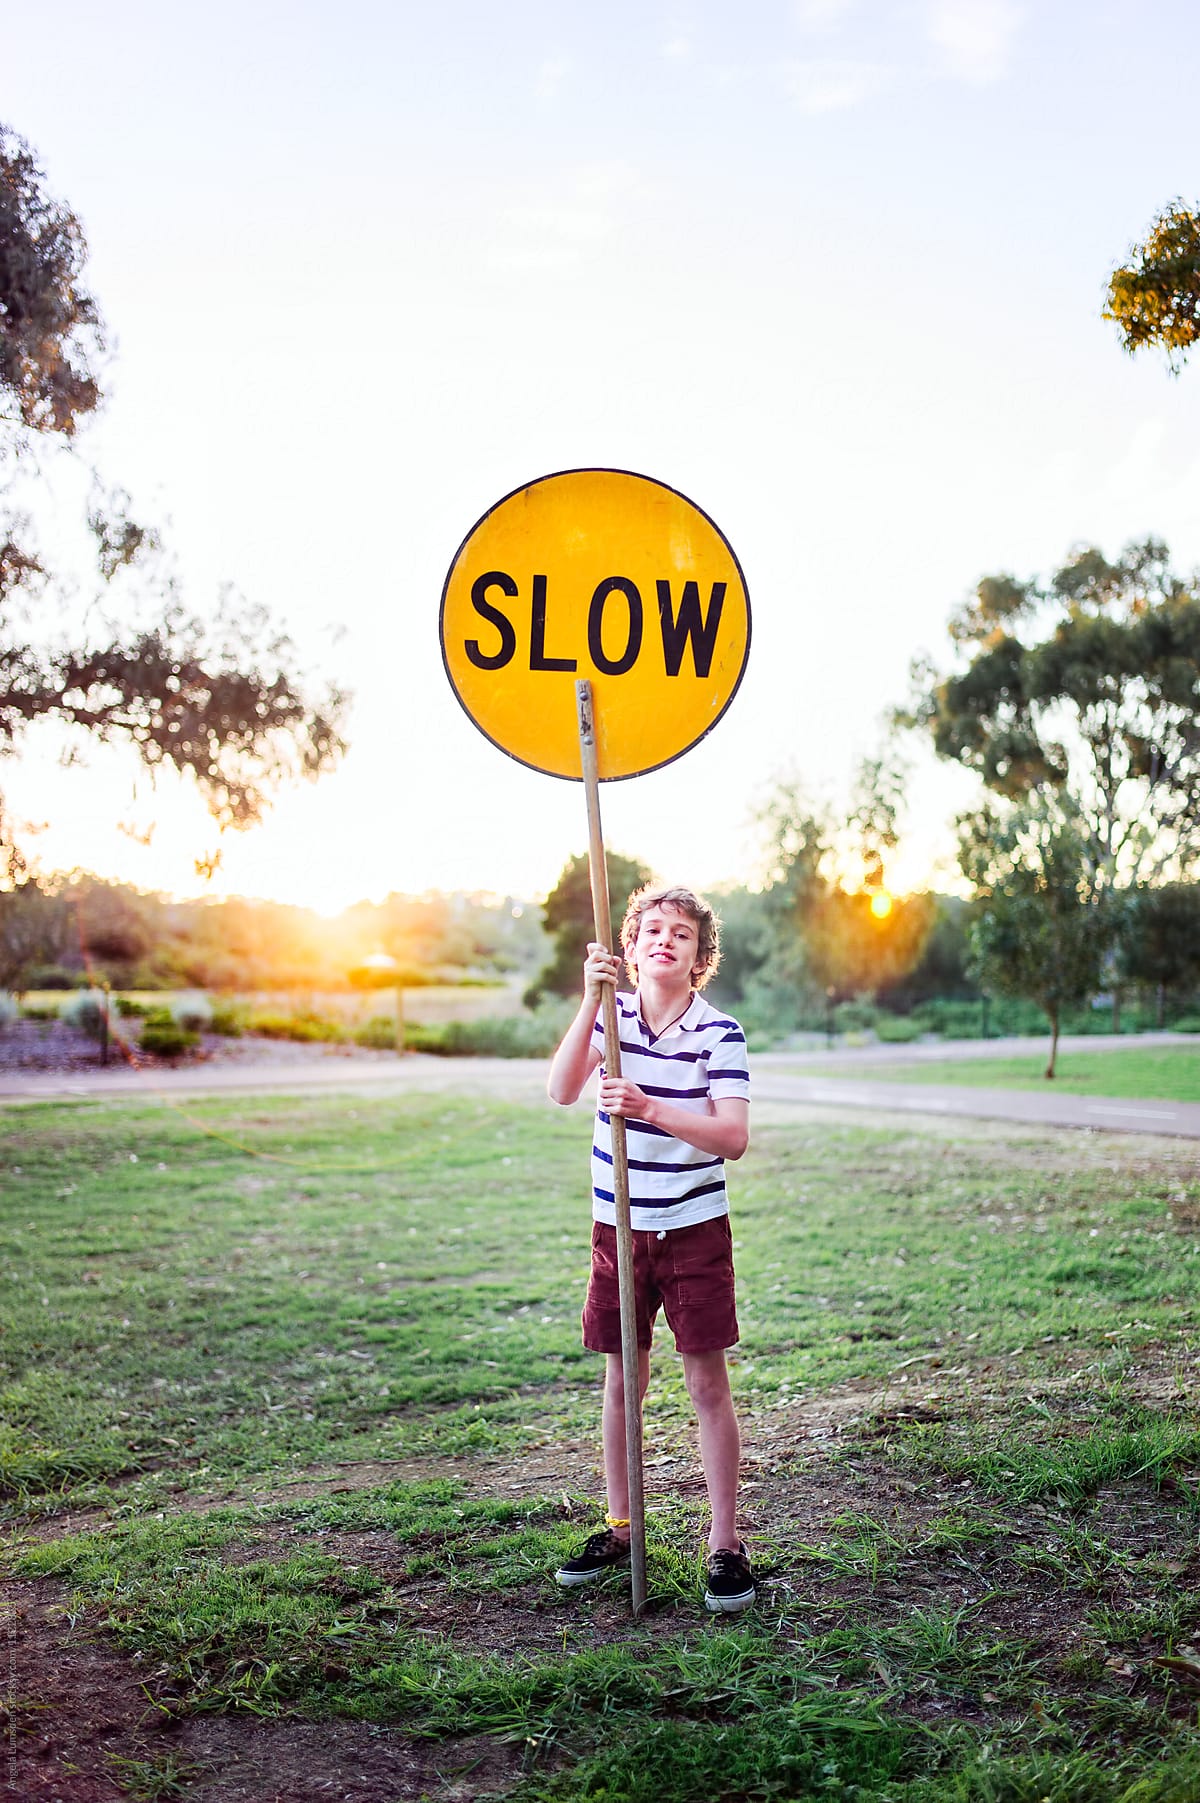 Boy with a slow sign in a park